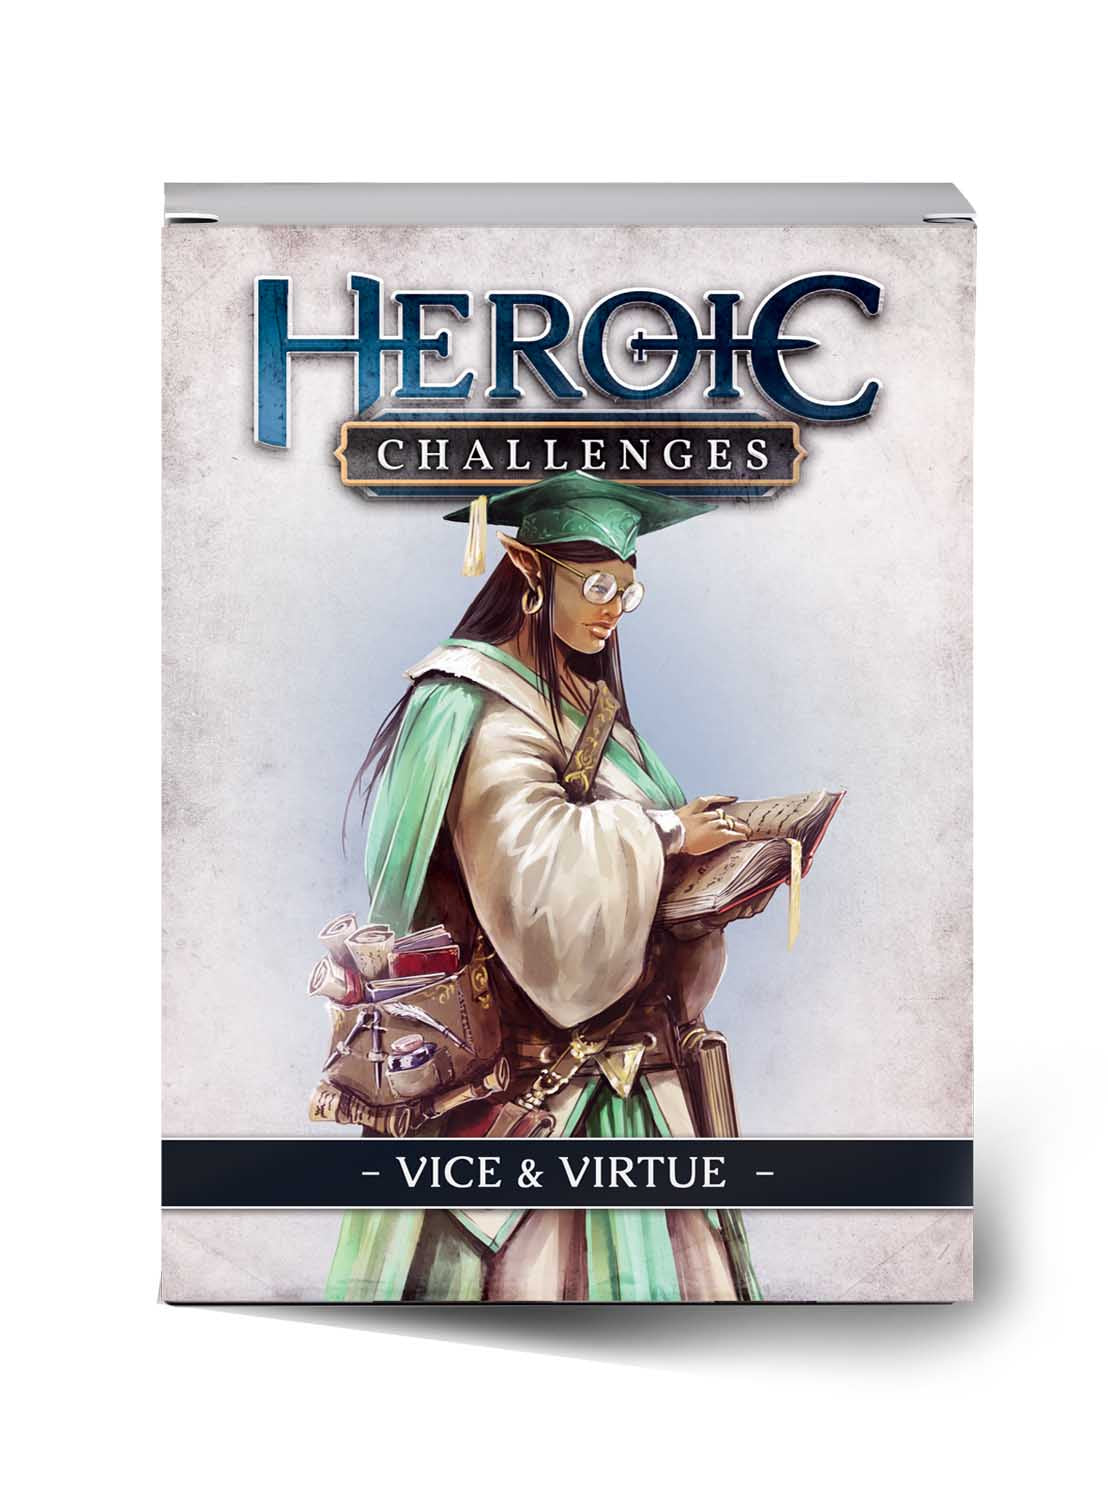 Heroic Challenges - Vice & Virtue Expansion Deck